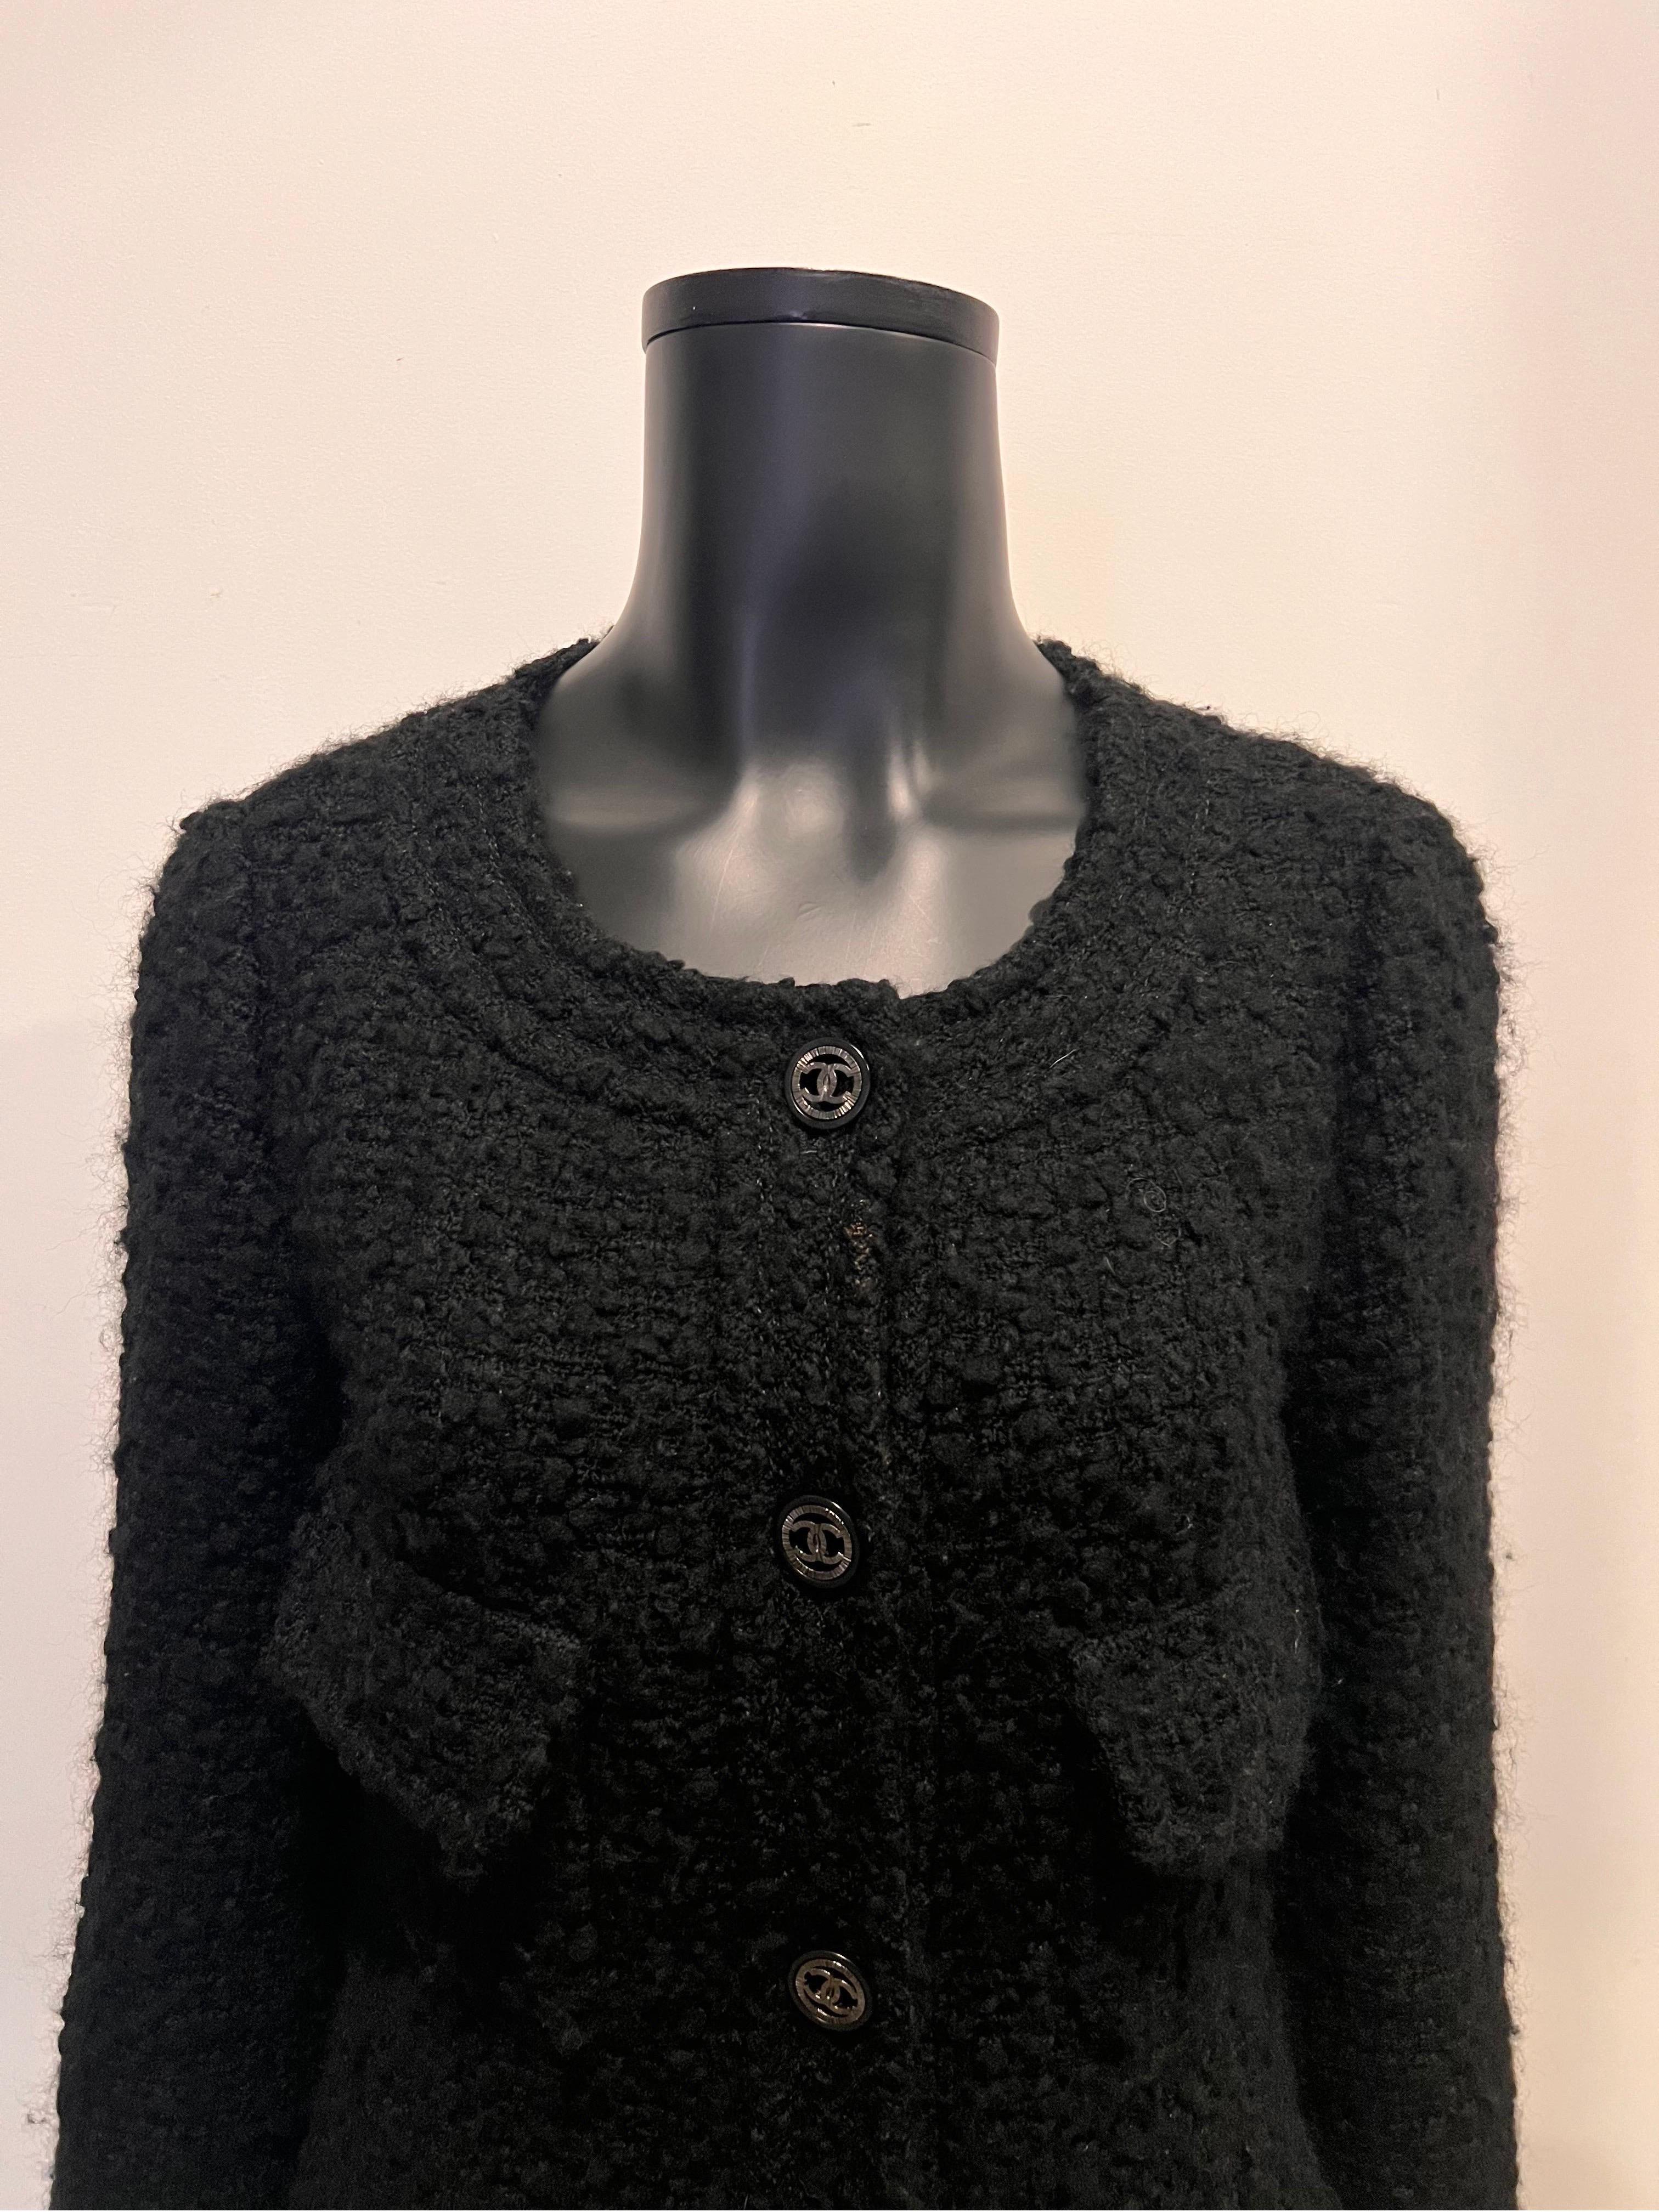 Women's or Men's Chanel 2013 boucle tweed coat dress in black with CC details buttons 